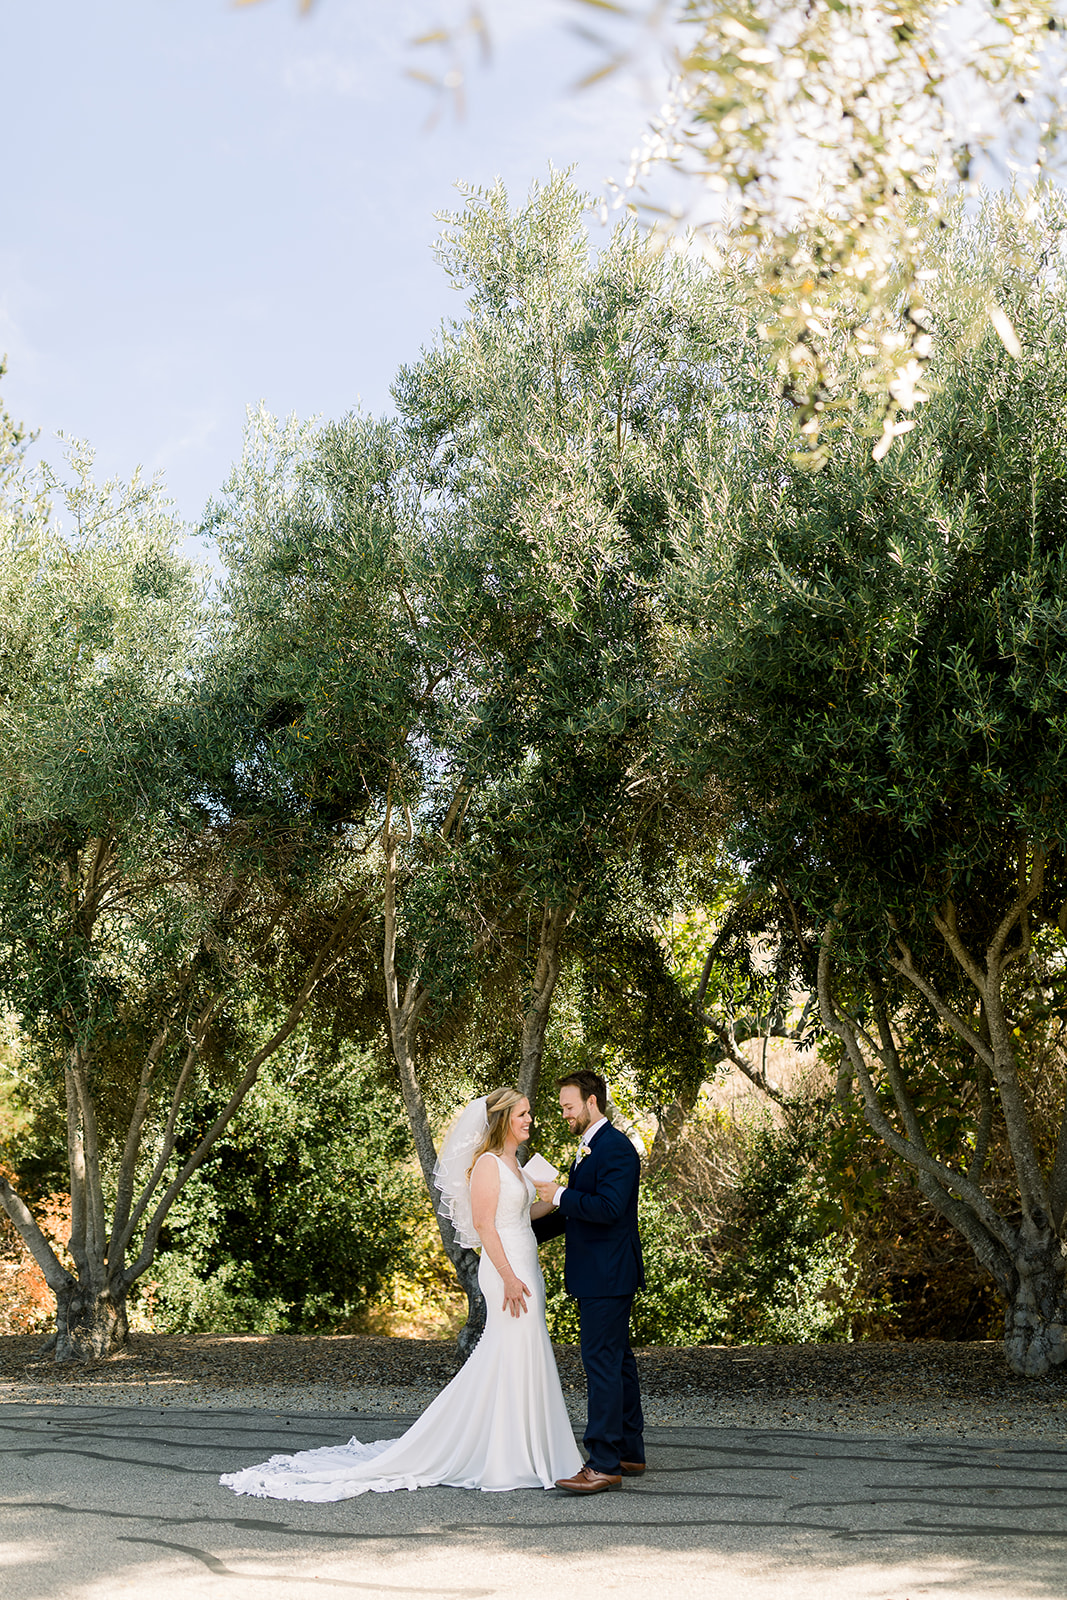 Warm sunlight filtering through the olive trees, casting a romantic glow on the newlyweds during their first look